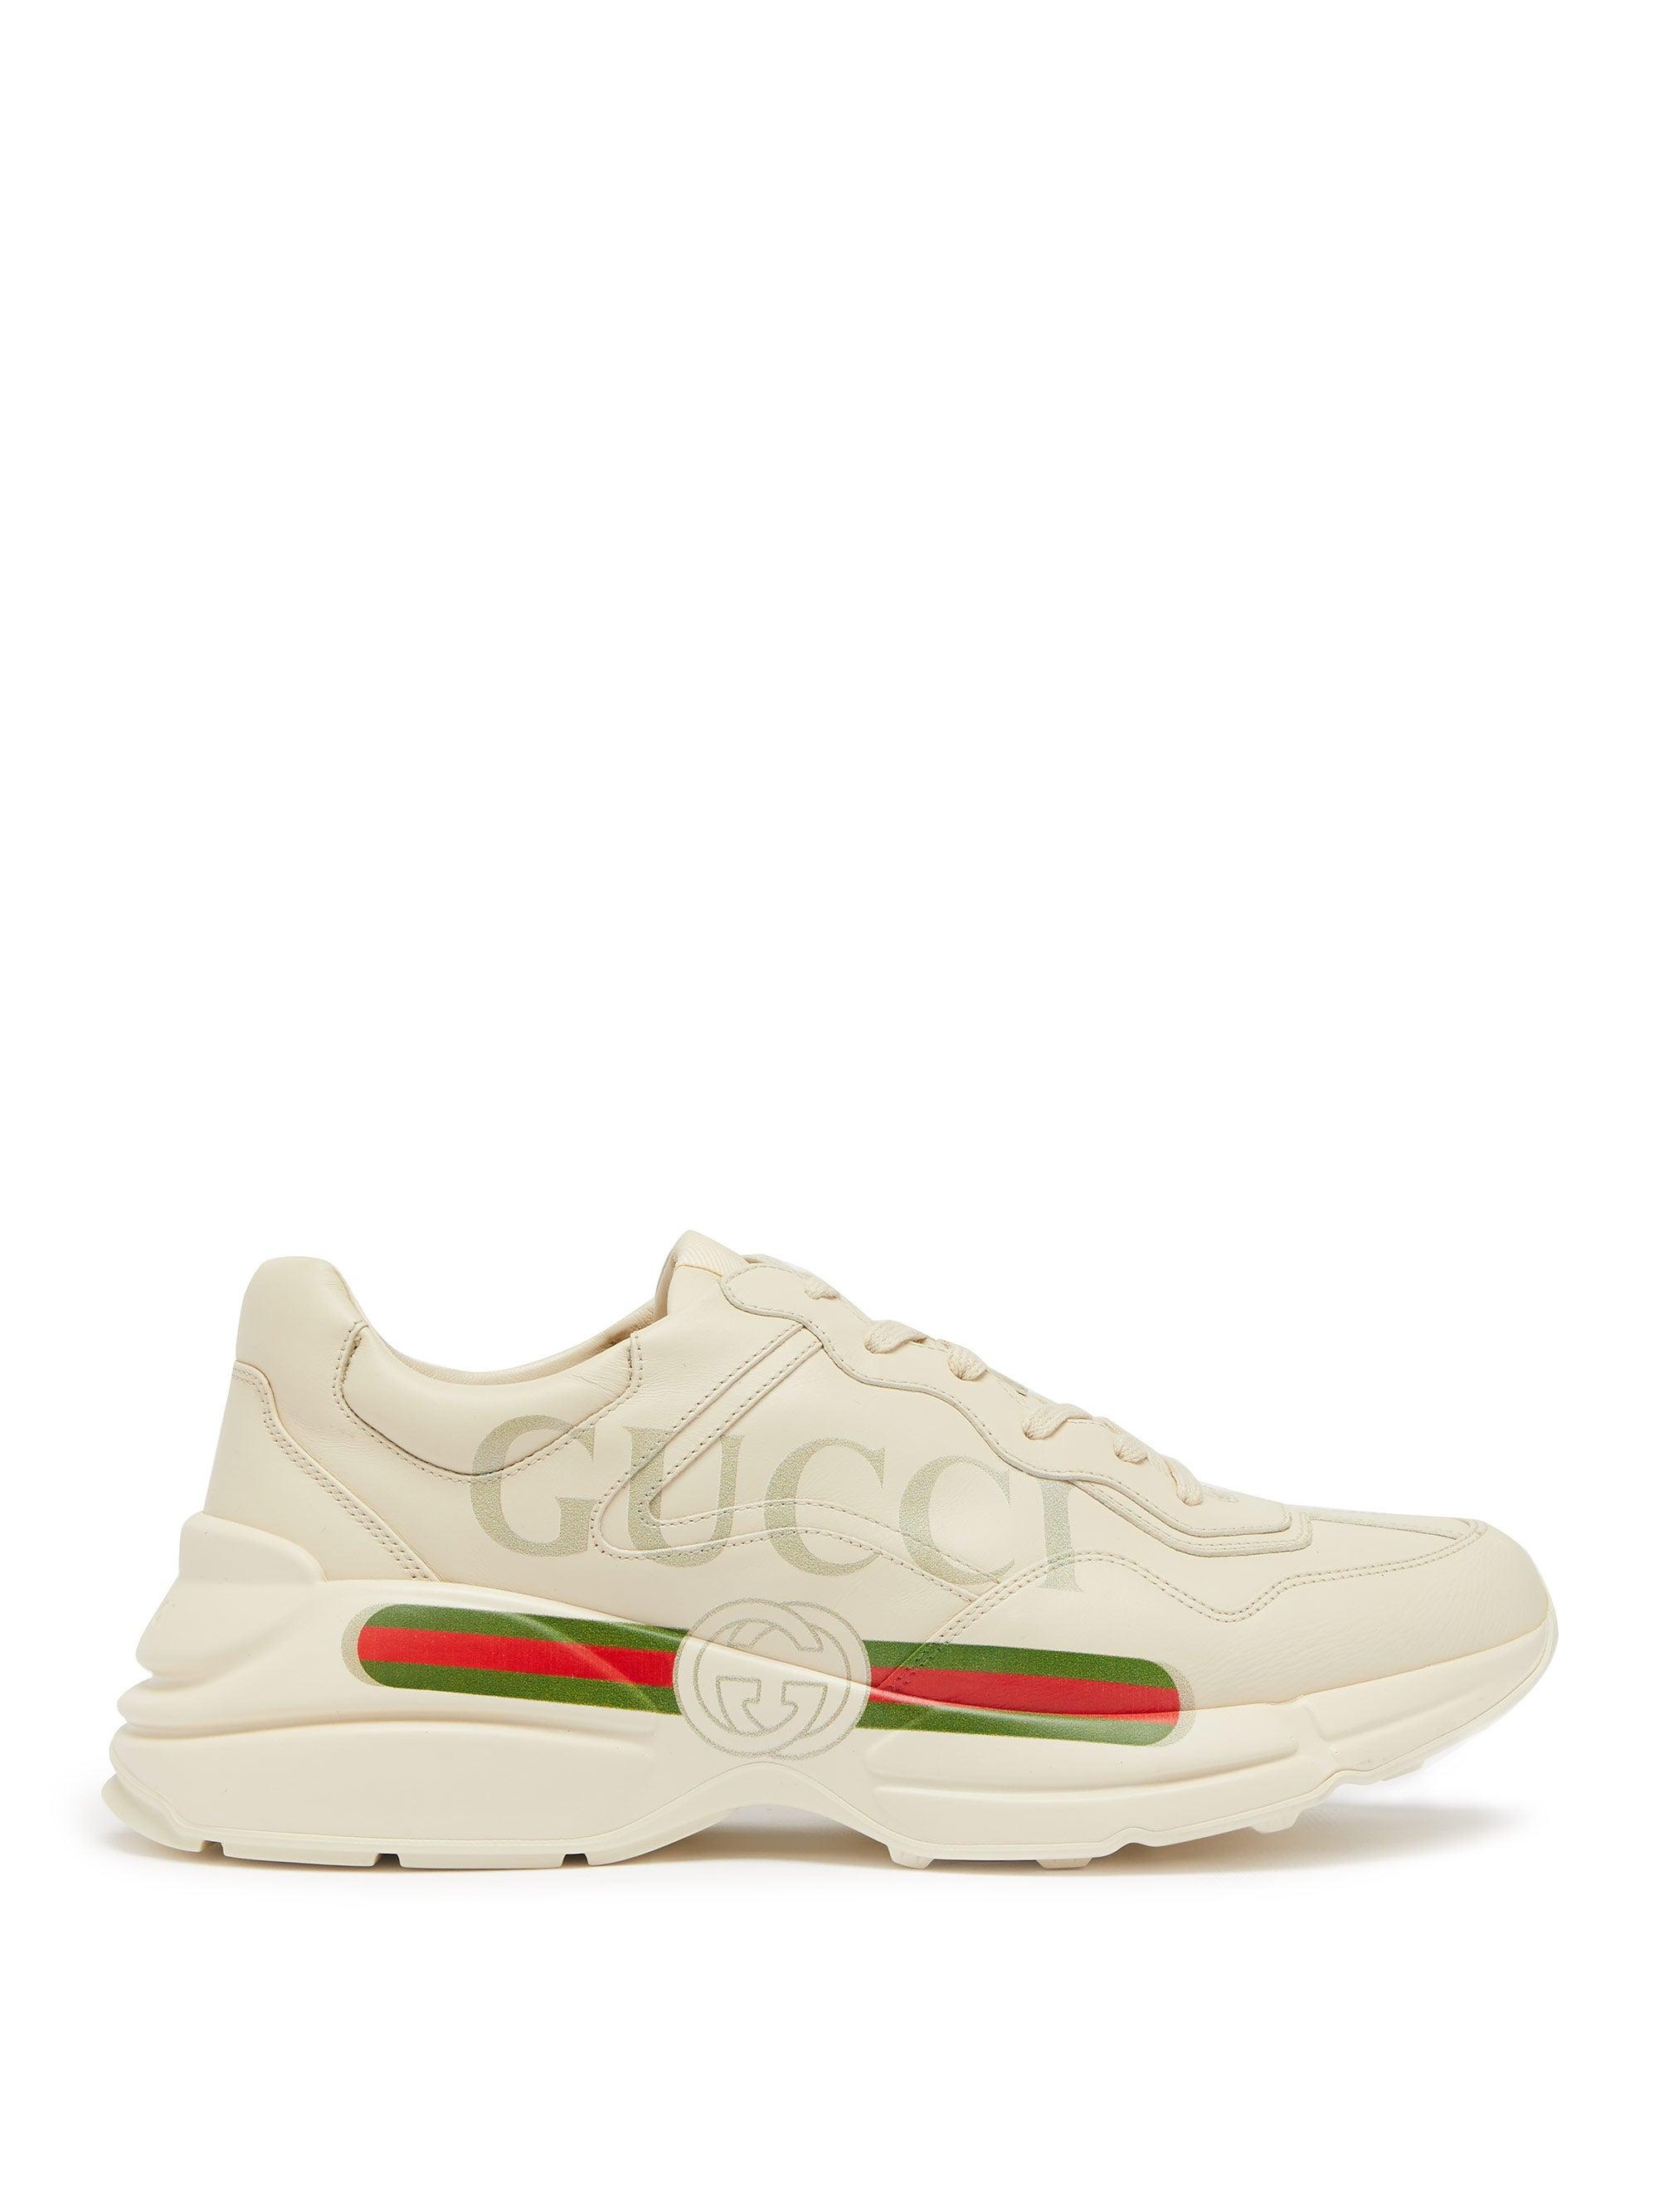 Gucci Rhyton Logo Leather Sneakers for 